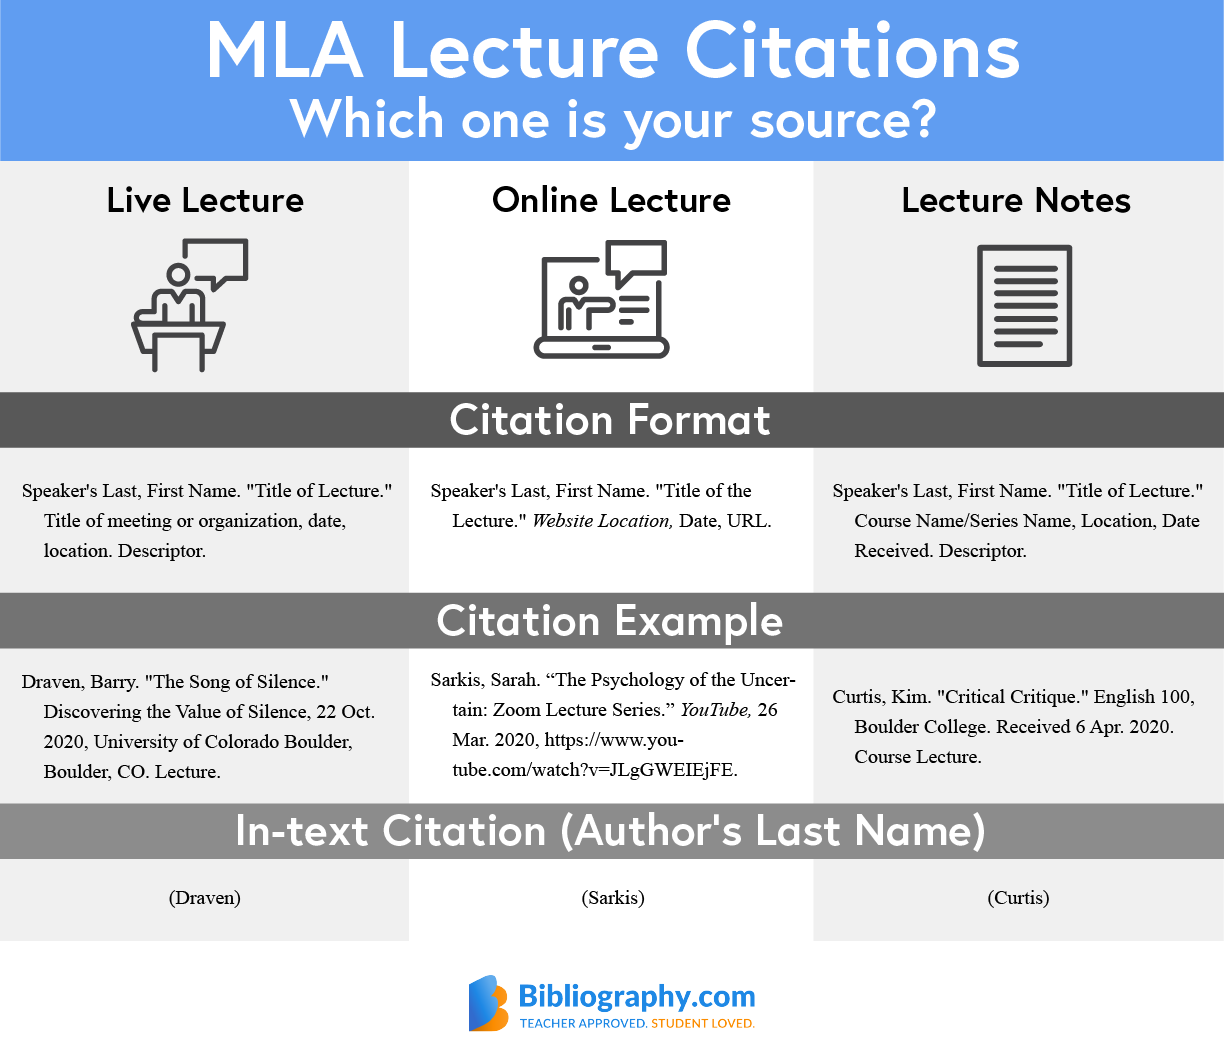 cite different sources of lectures in MLA